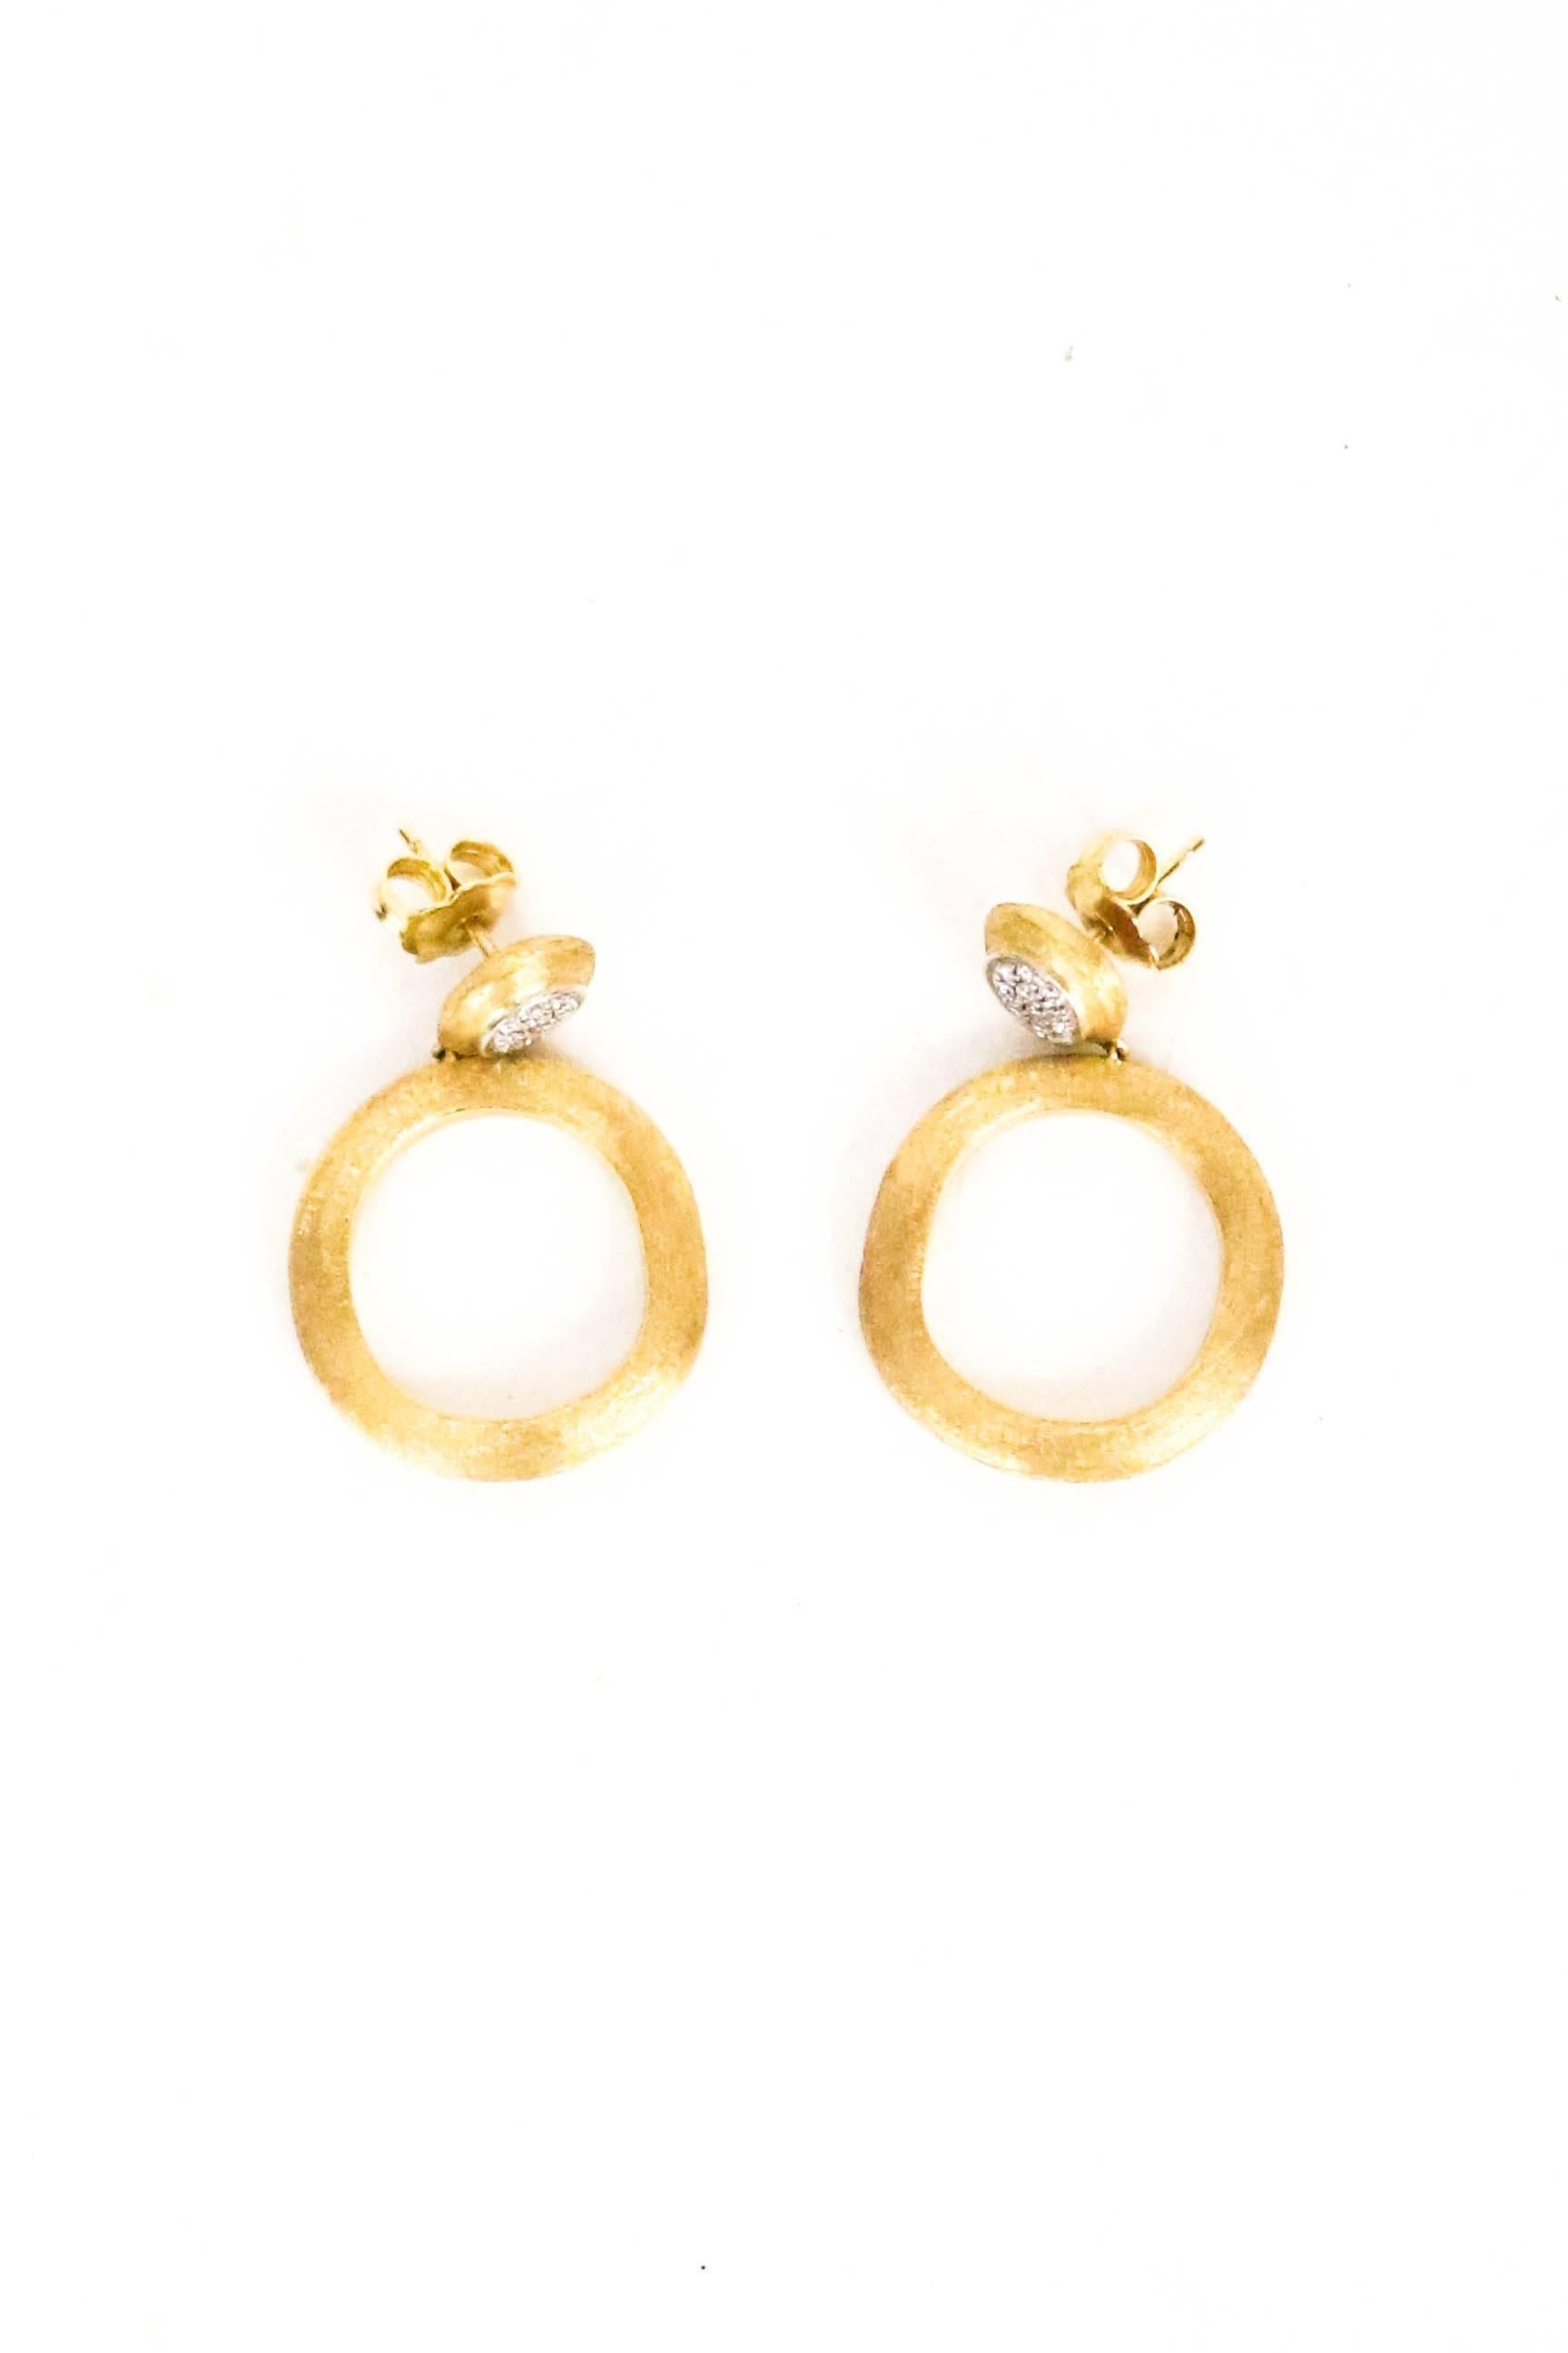 Offered is a stunning pair of Marcus Bicego earrings in 18k brushed yellow gold with pave diamonds.  Length of earring measures 1.25 inches.  Gold loops suspended from pave diamonds surrounded by gold.  On posts. 